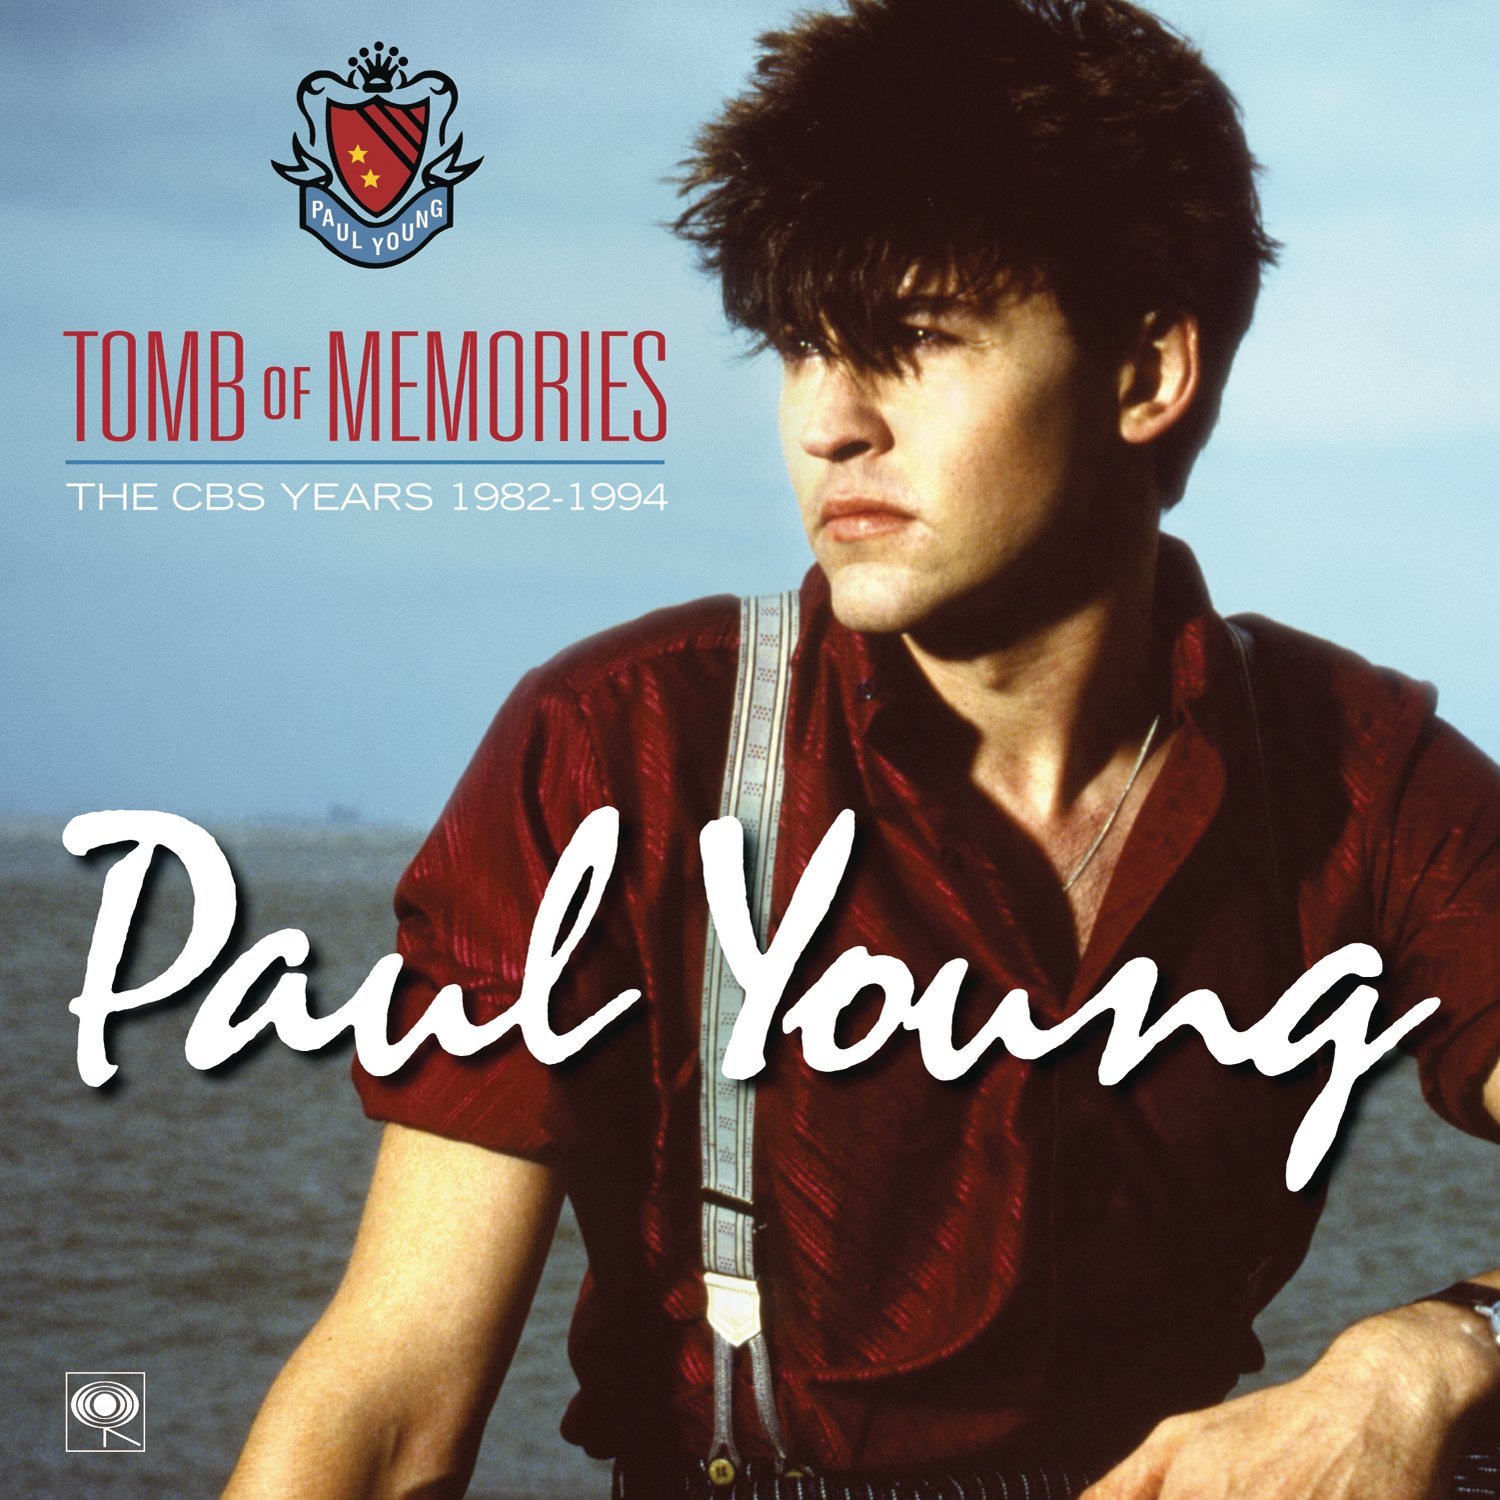 Paul Young - Tomb of Memories (The CBS Years (1982-1994)) (Music CD)